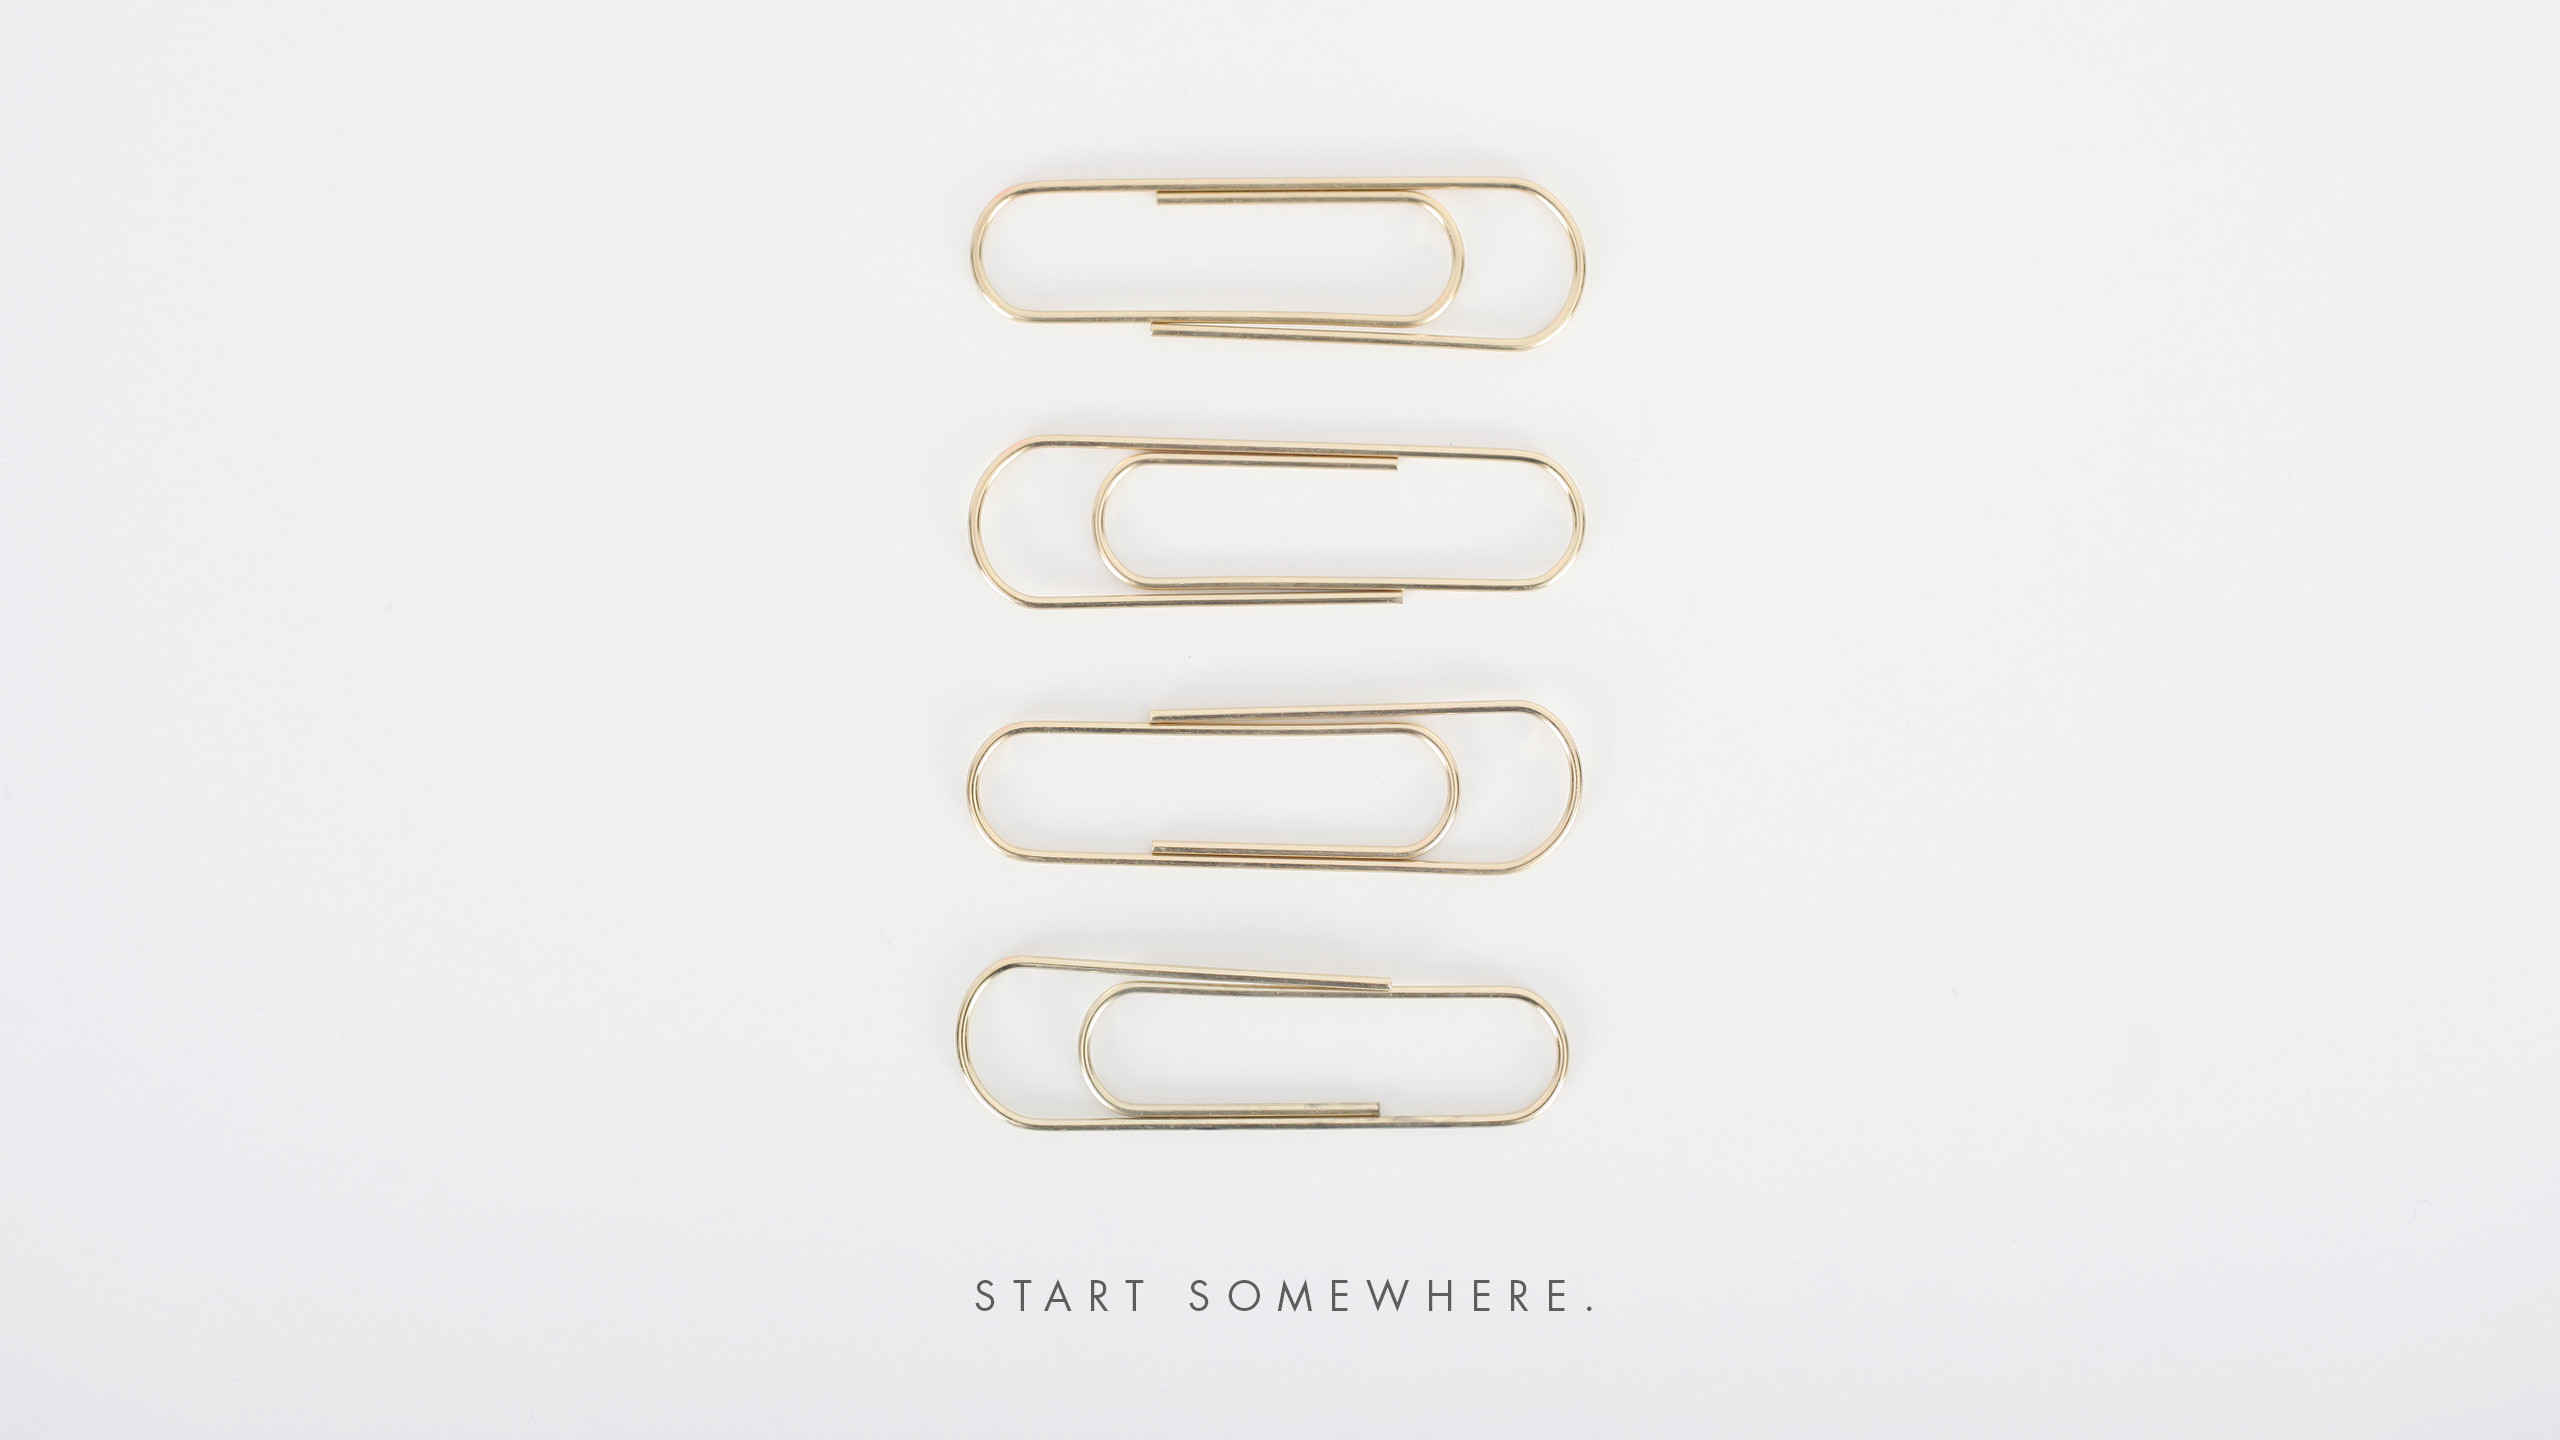 2560x1440 paper-clips-start-somewhere-organize-your-life-House-Of-Hipsters-free- desktop-wallpaper-.jpg (2560Ã1440) | fonts & printables |  Pinterest ...